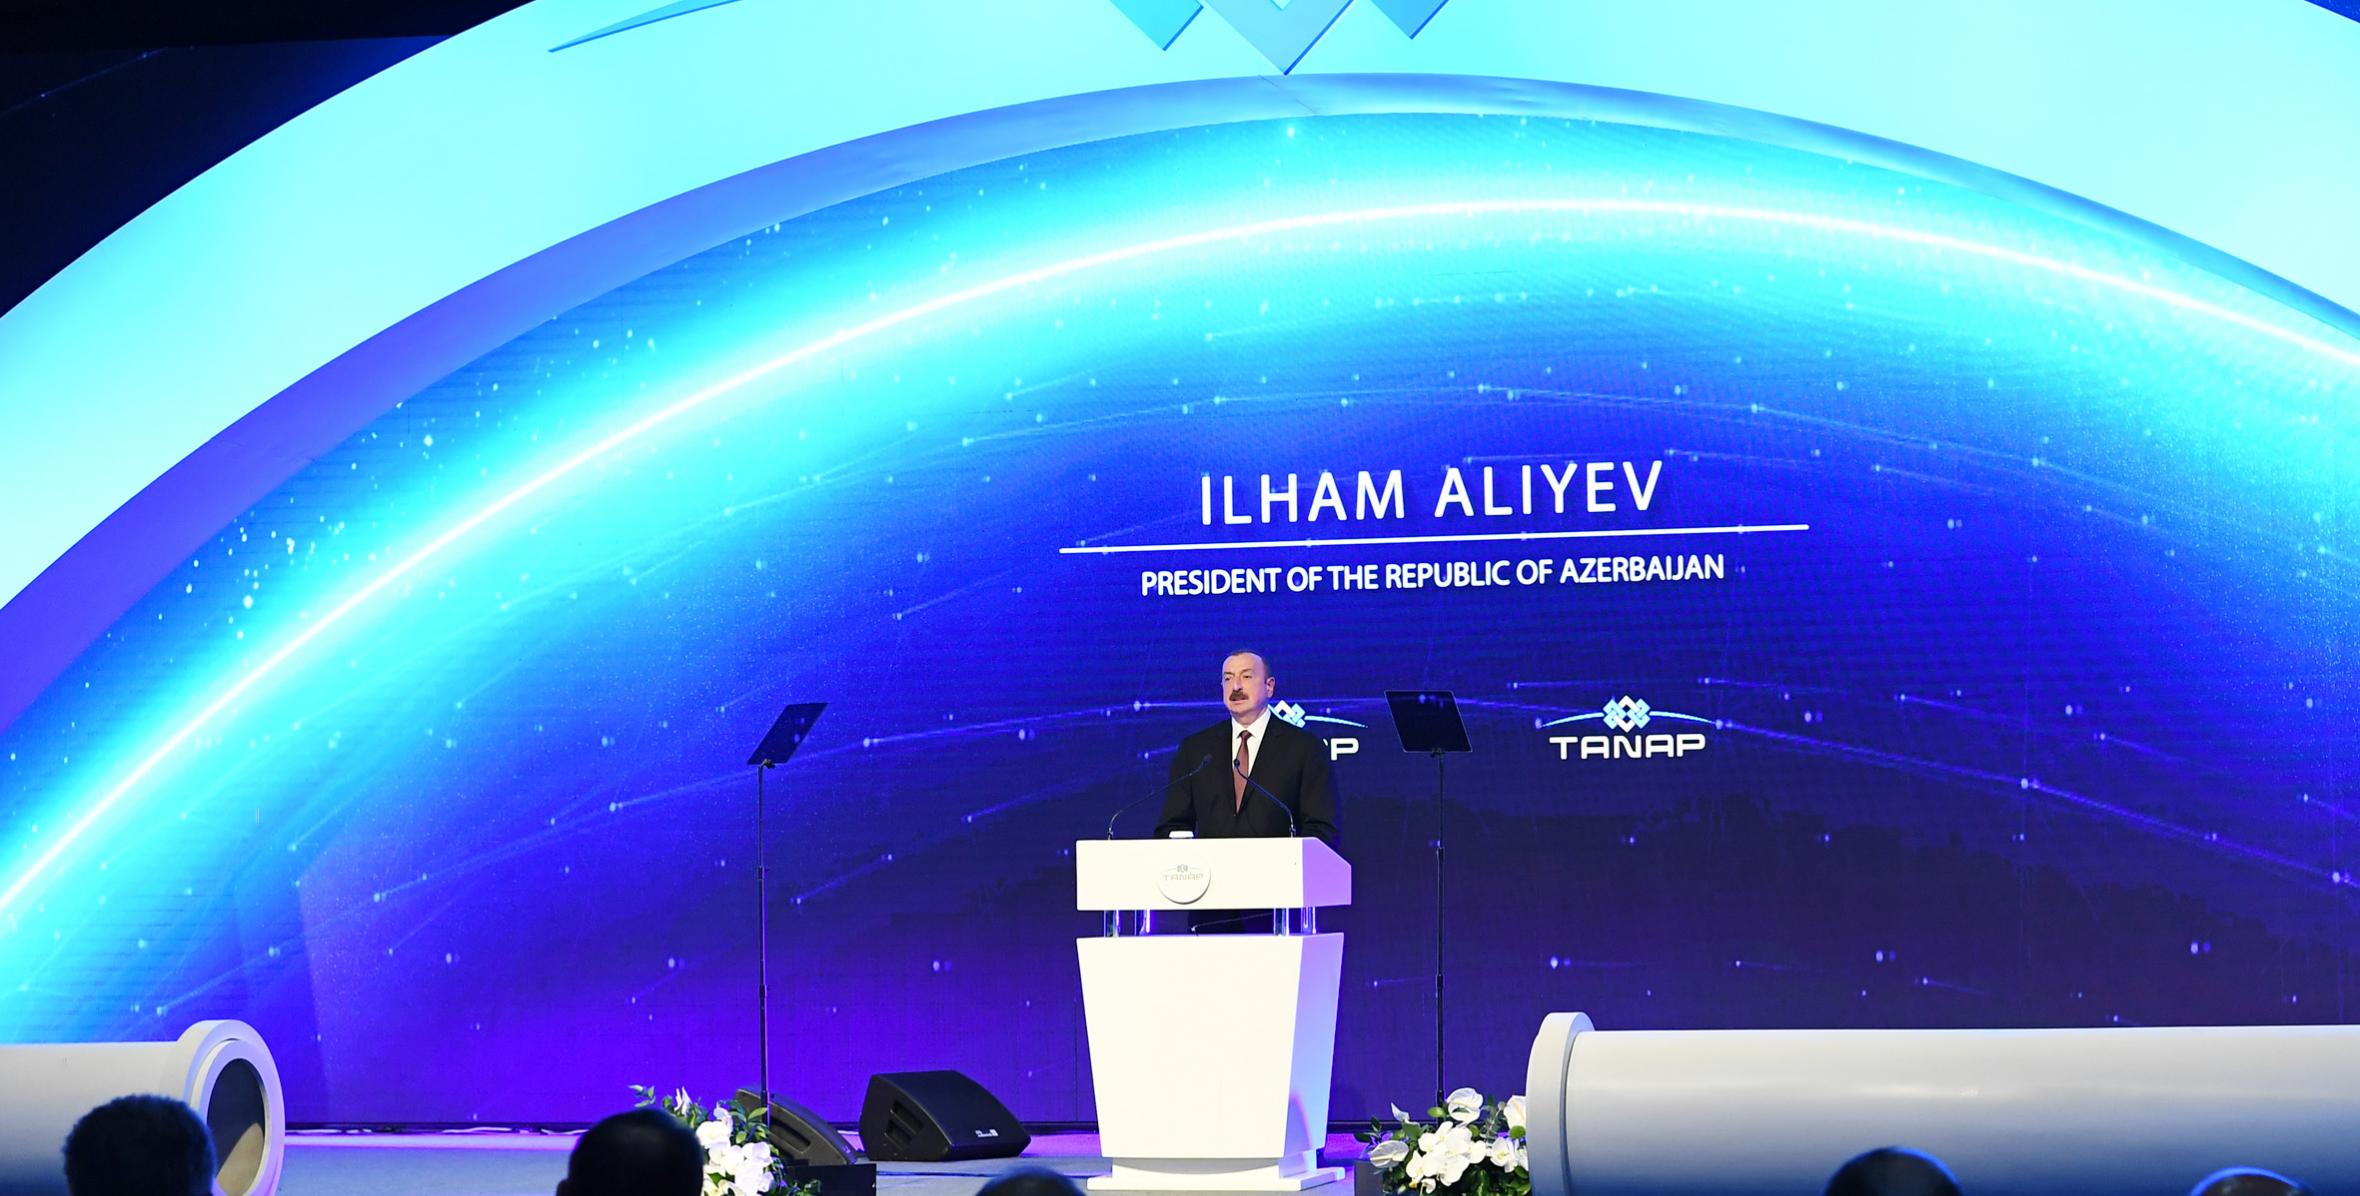 Ilham Aliyev attended inauguration ceremony of TANAP project in Turkish city of Eskisehir